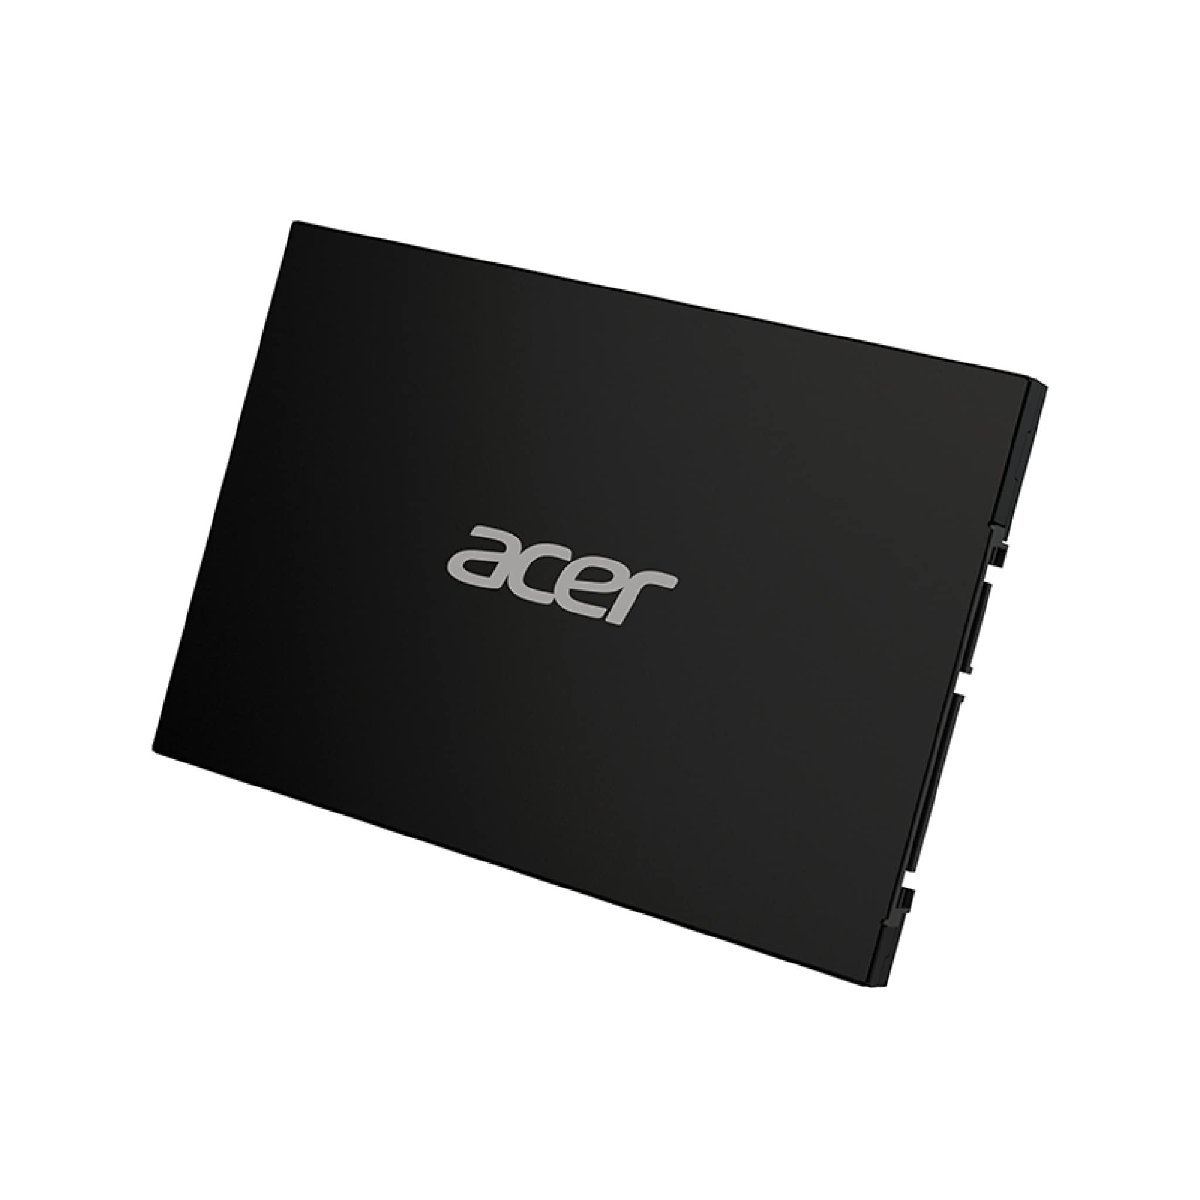  free shipping *Acer RE100-25-128GB 3D NAND SATA 2.5 -inch SSD metal case (128GB)